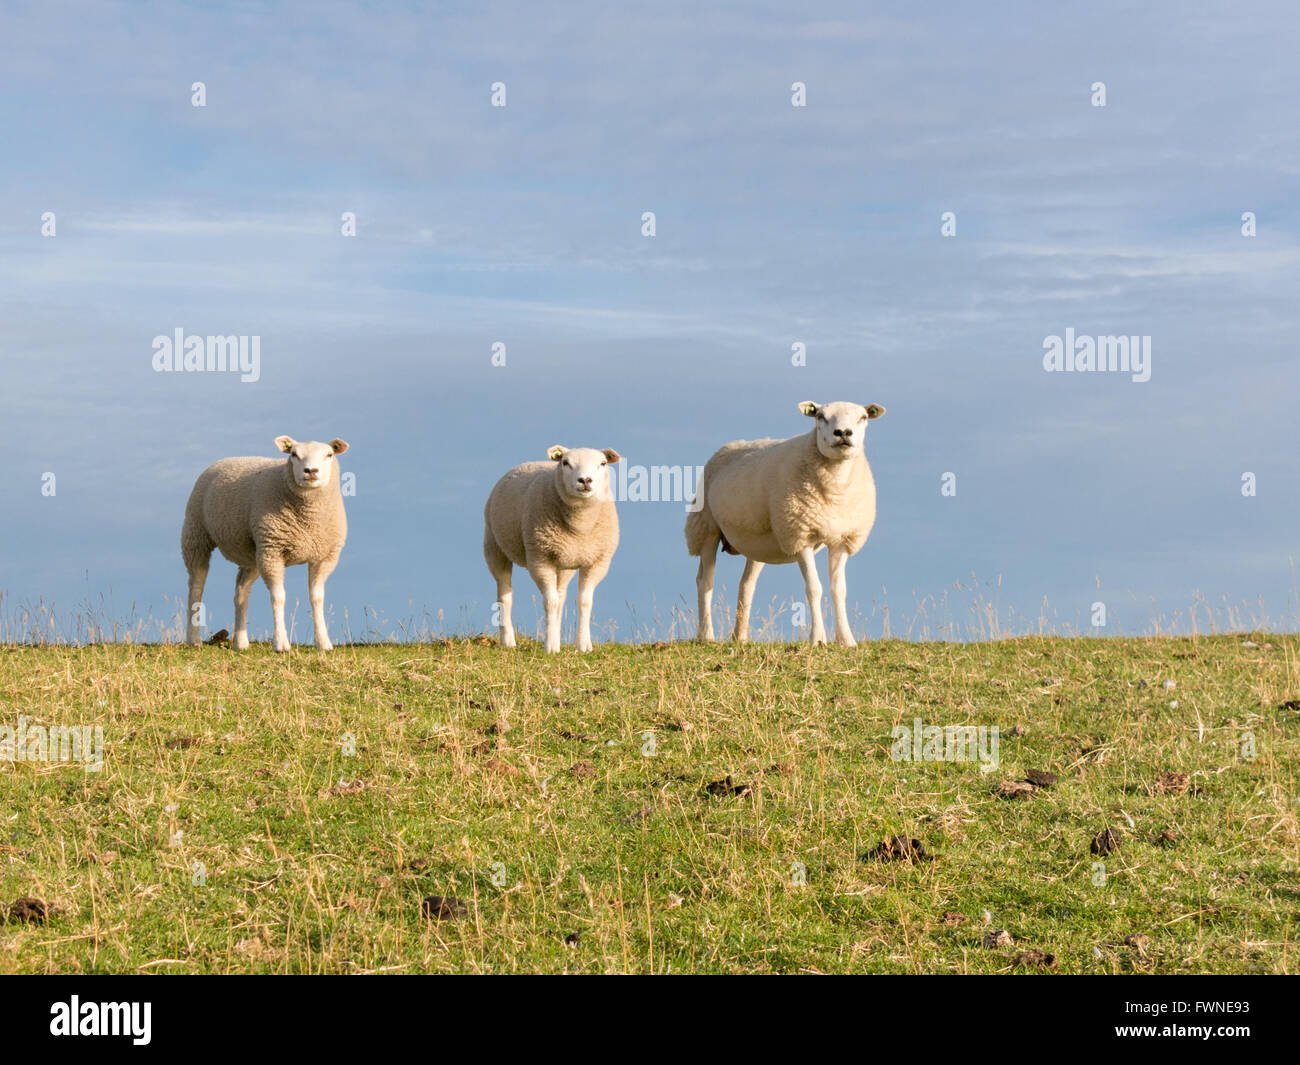 Portrait of three sheep standing side by side in a row in grass of polder dyke, Netherlands Stock Photo